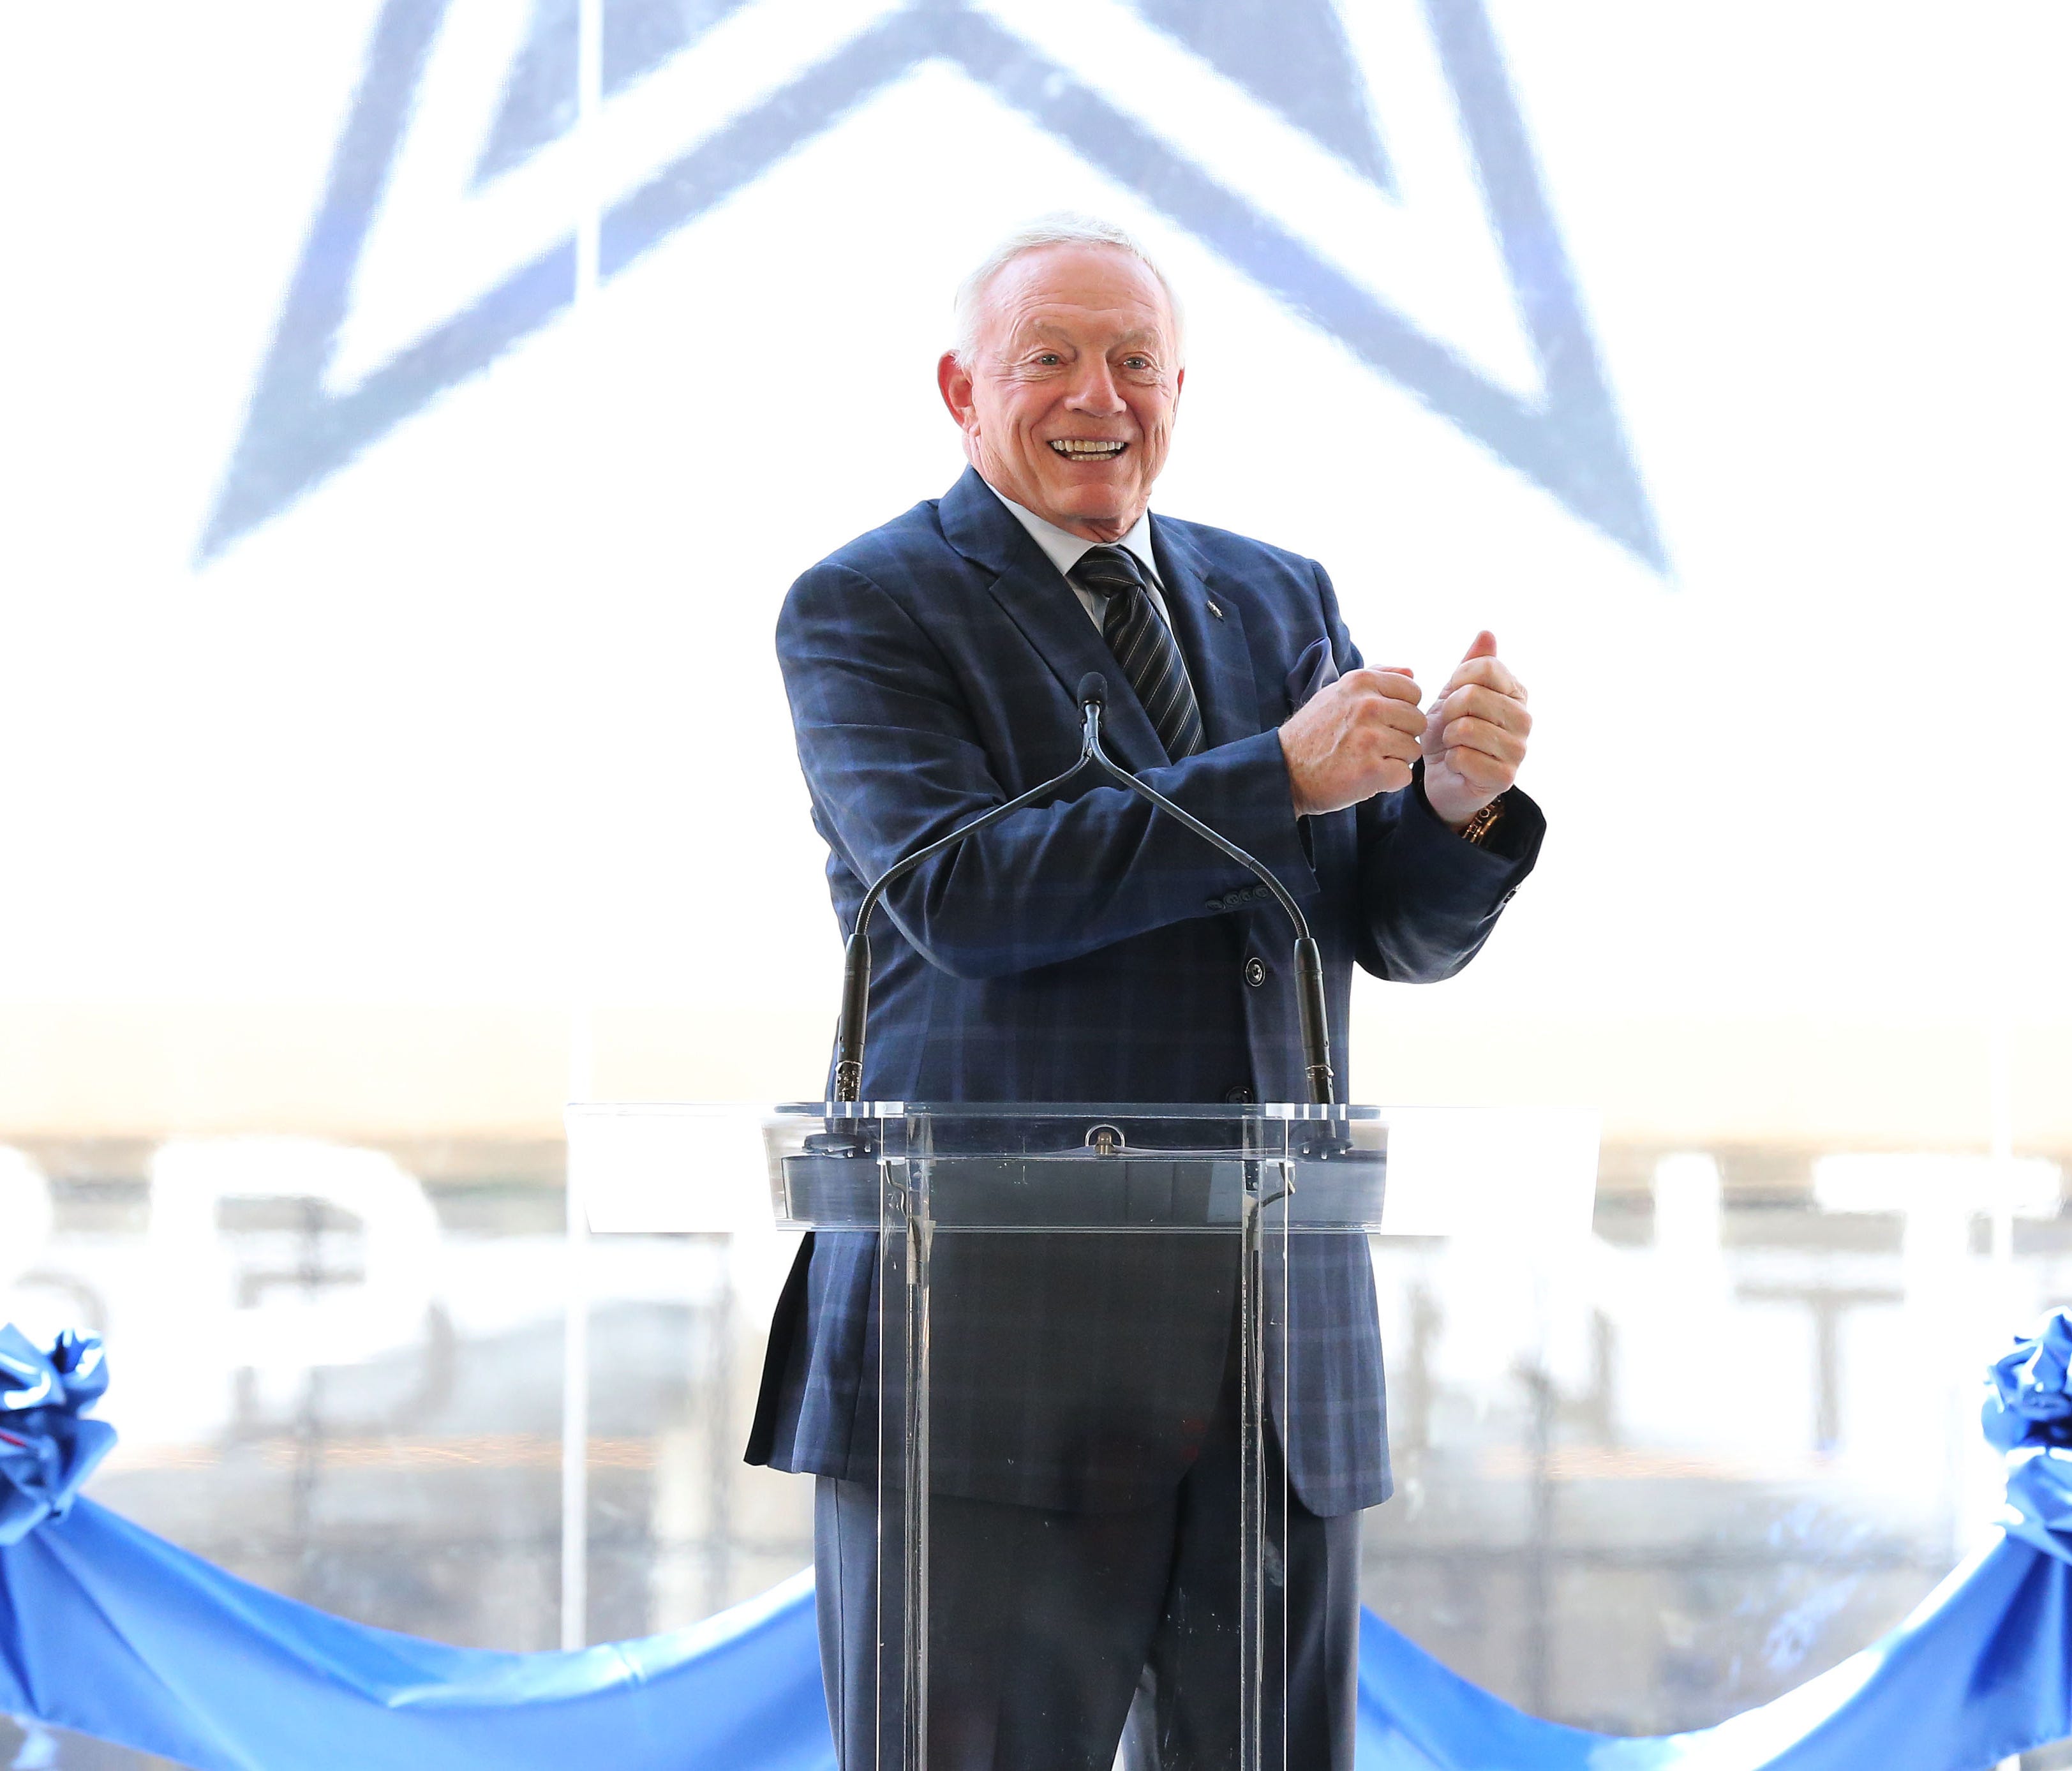 Dallas Cowboys owner Jerry Jones' gift to Arkansas police officers got him in trouble.